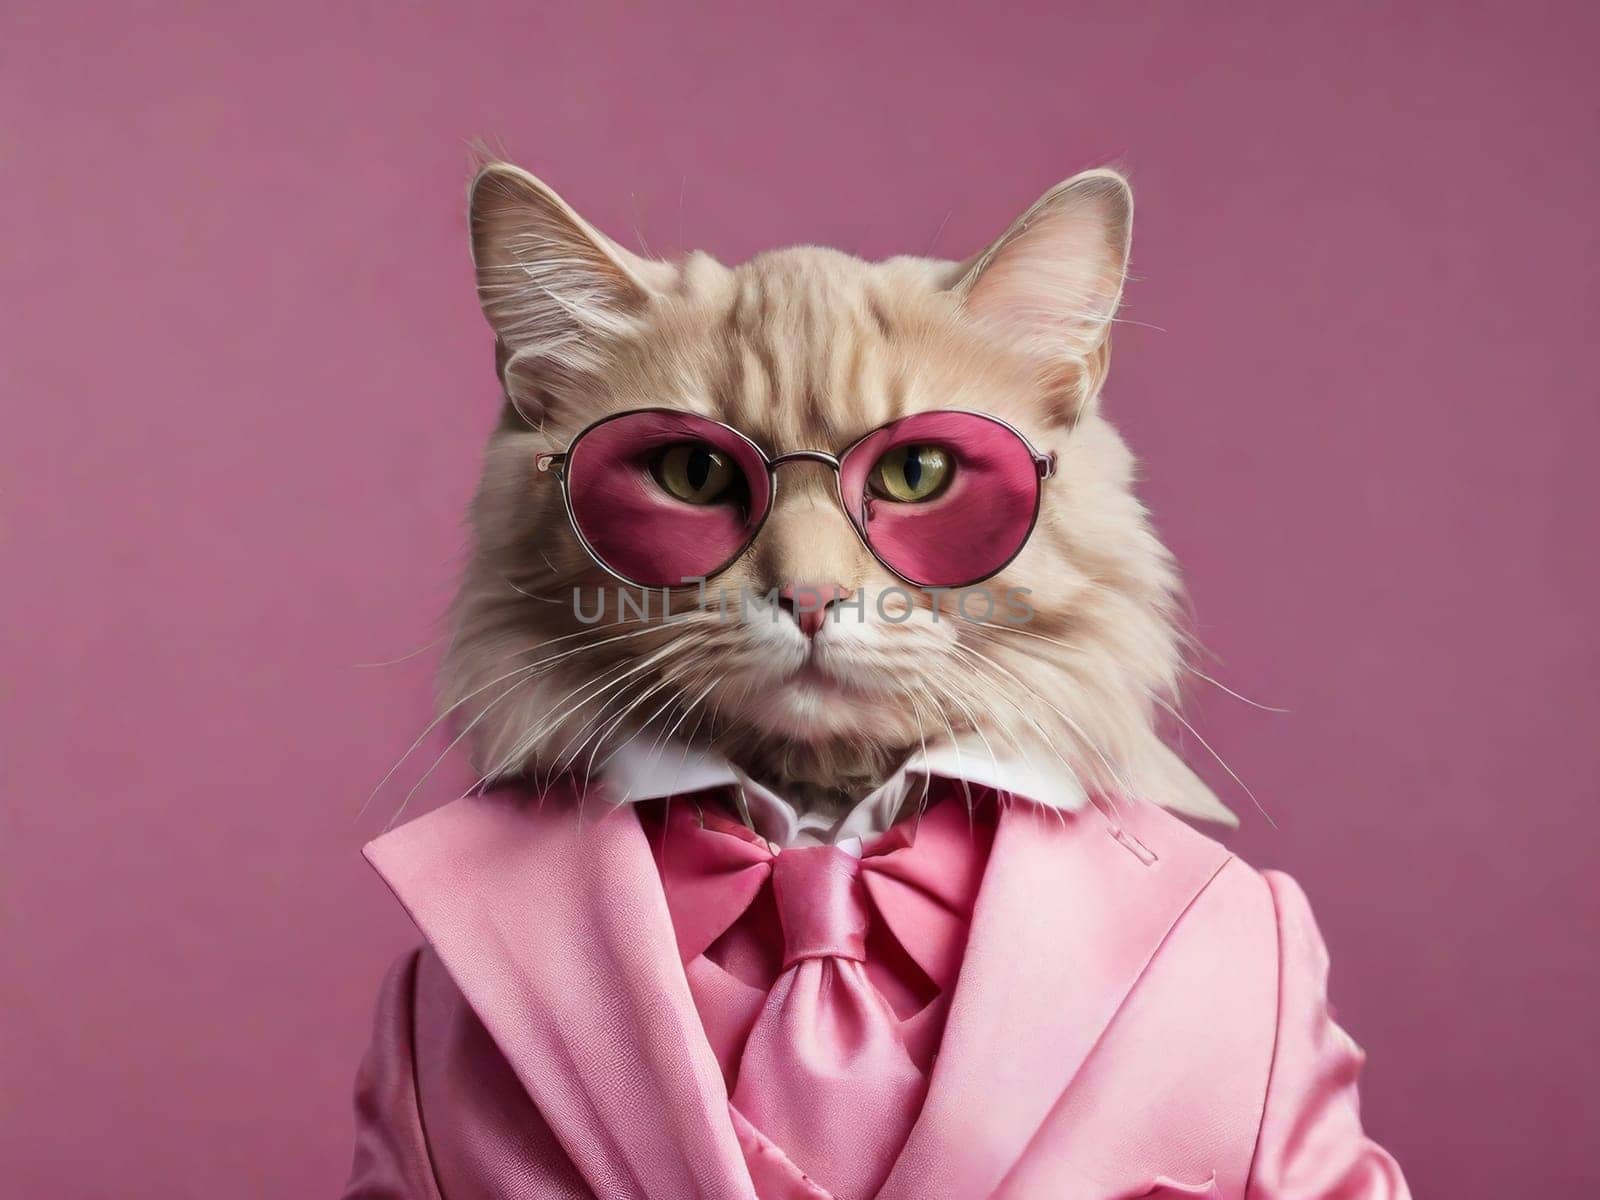 Business cat in a pink suit and glasses on a pink background.